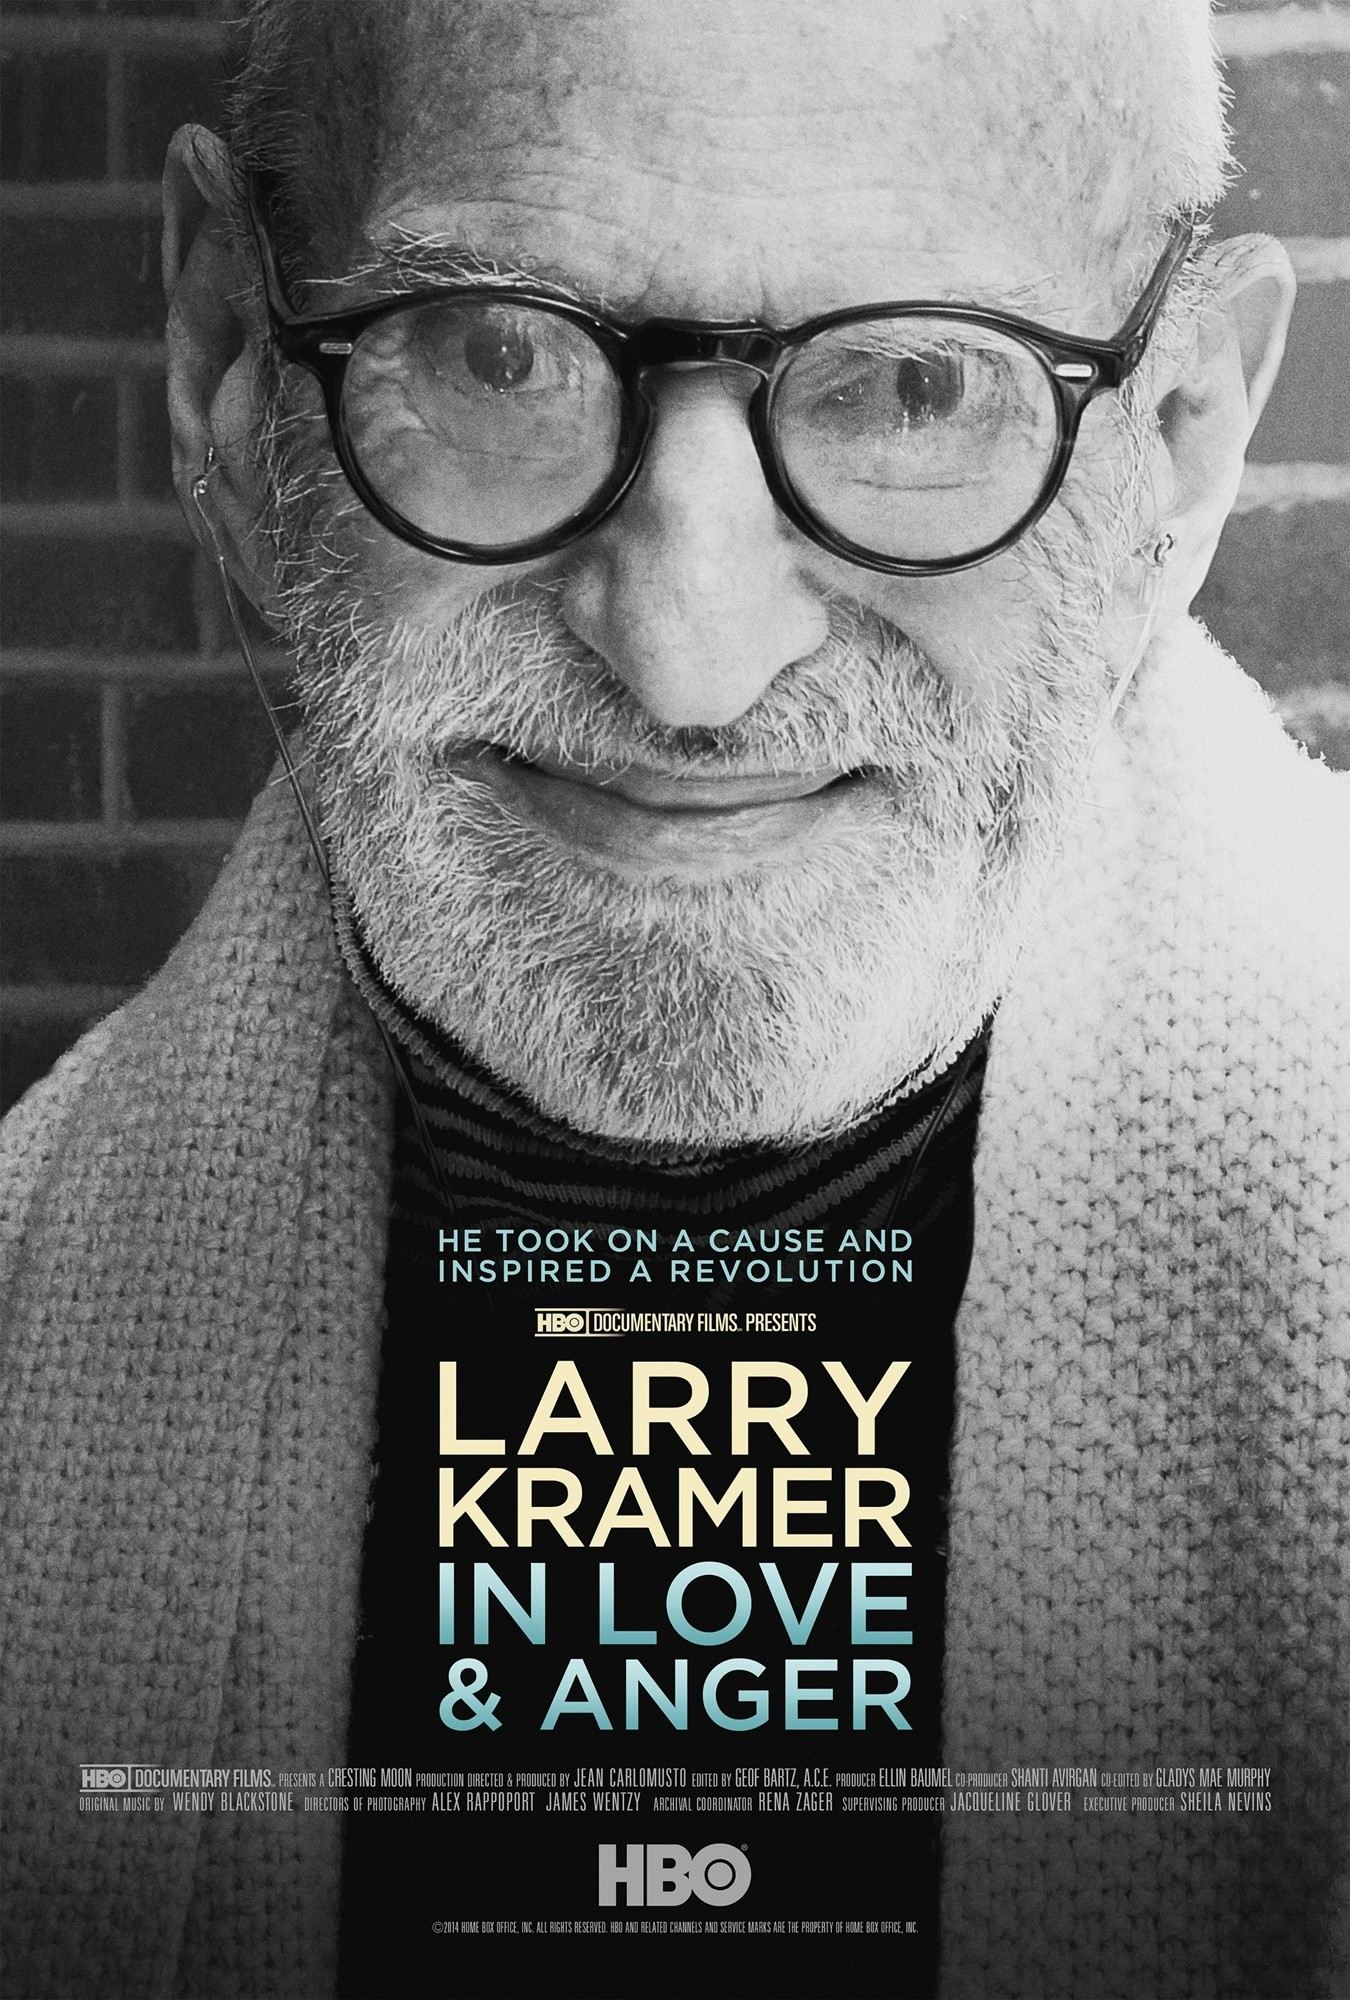 Poster of HBO's Larry Kramer in Love and Anger (2015)